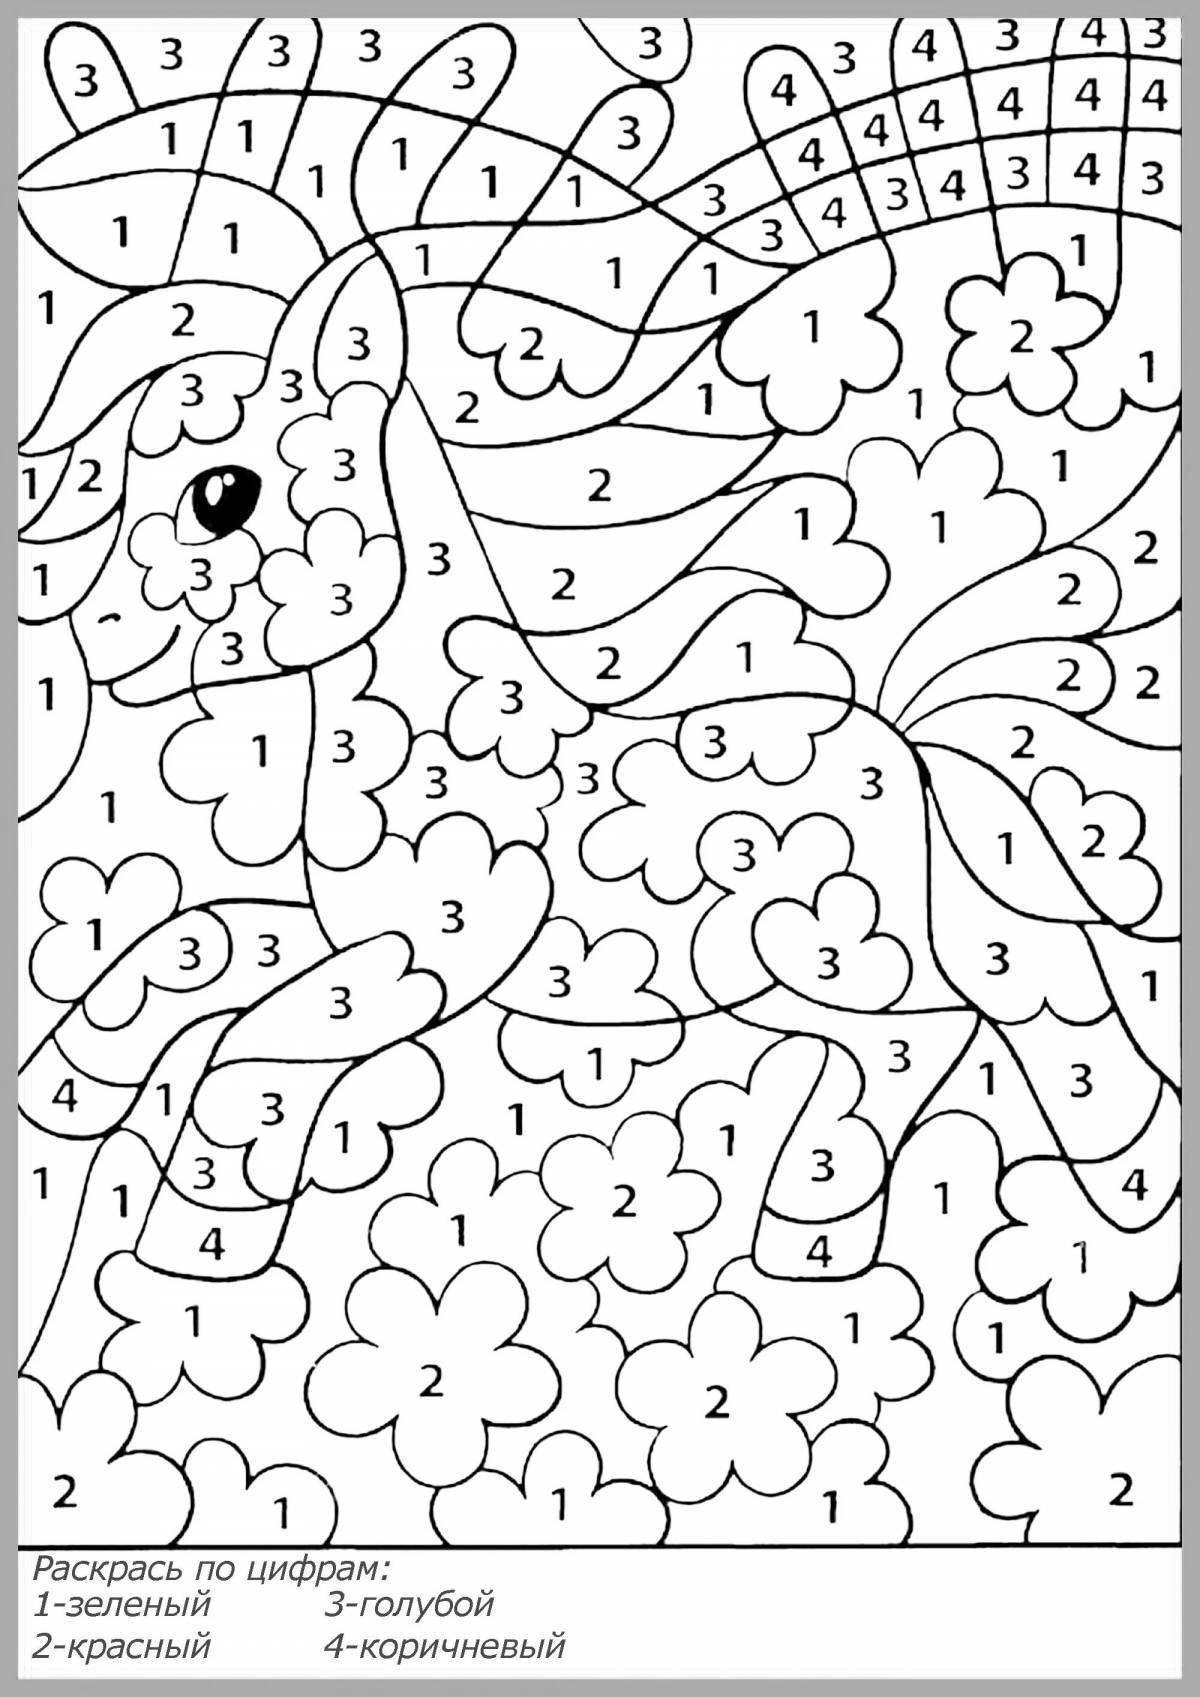 Colorful coloring games for girls by numbers